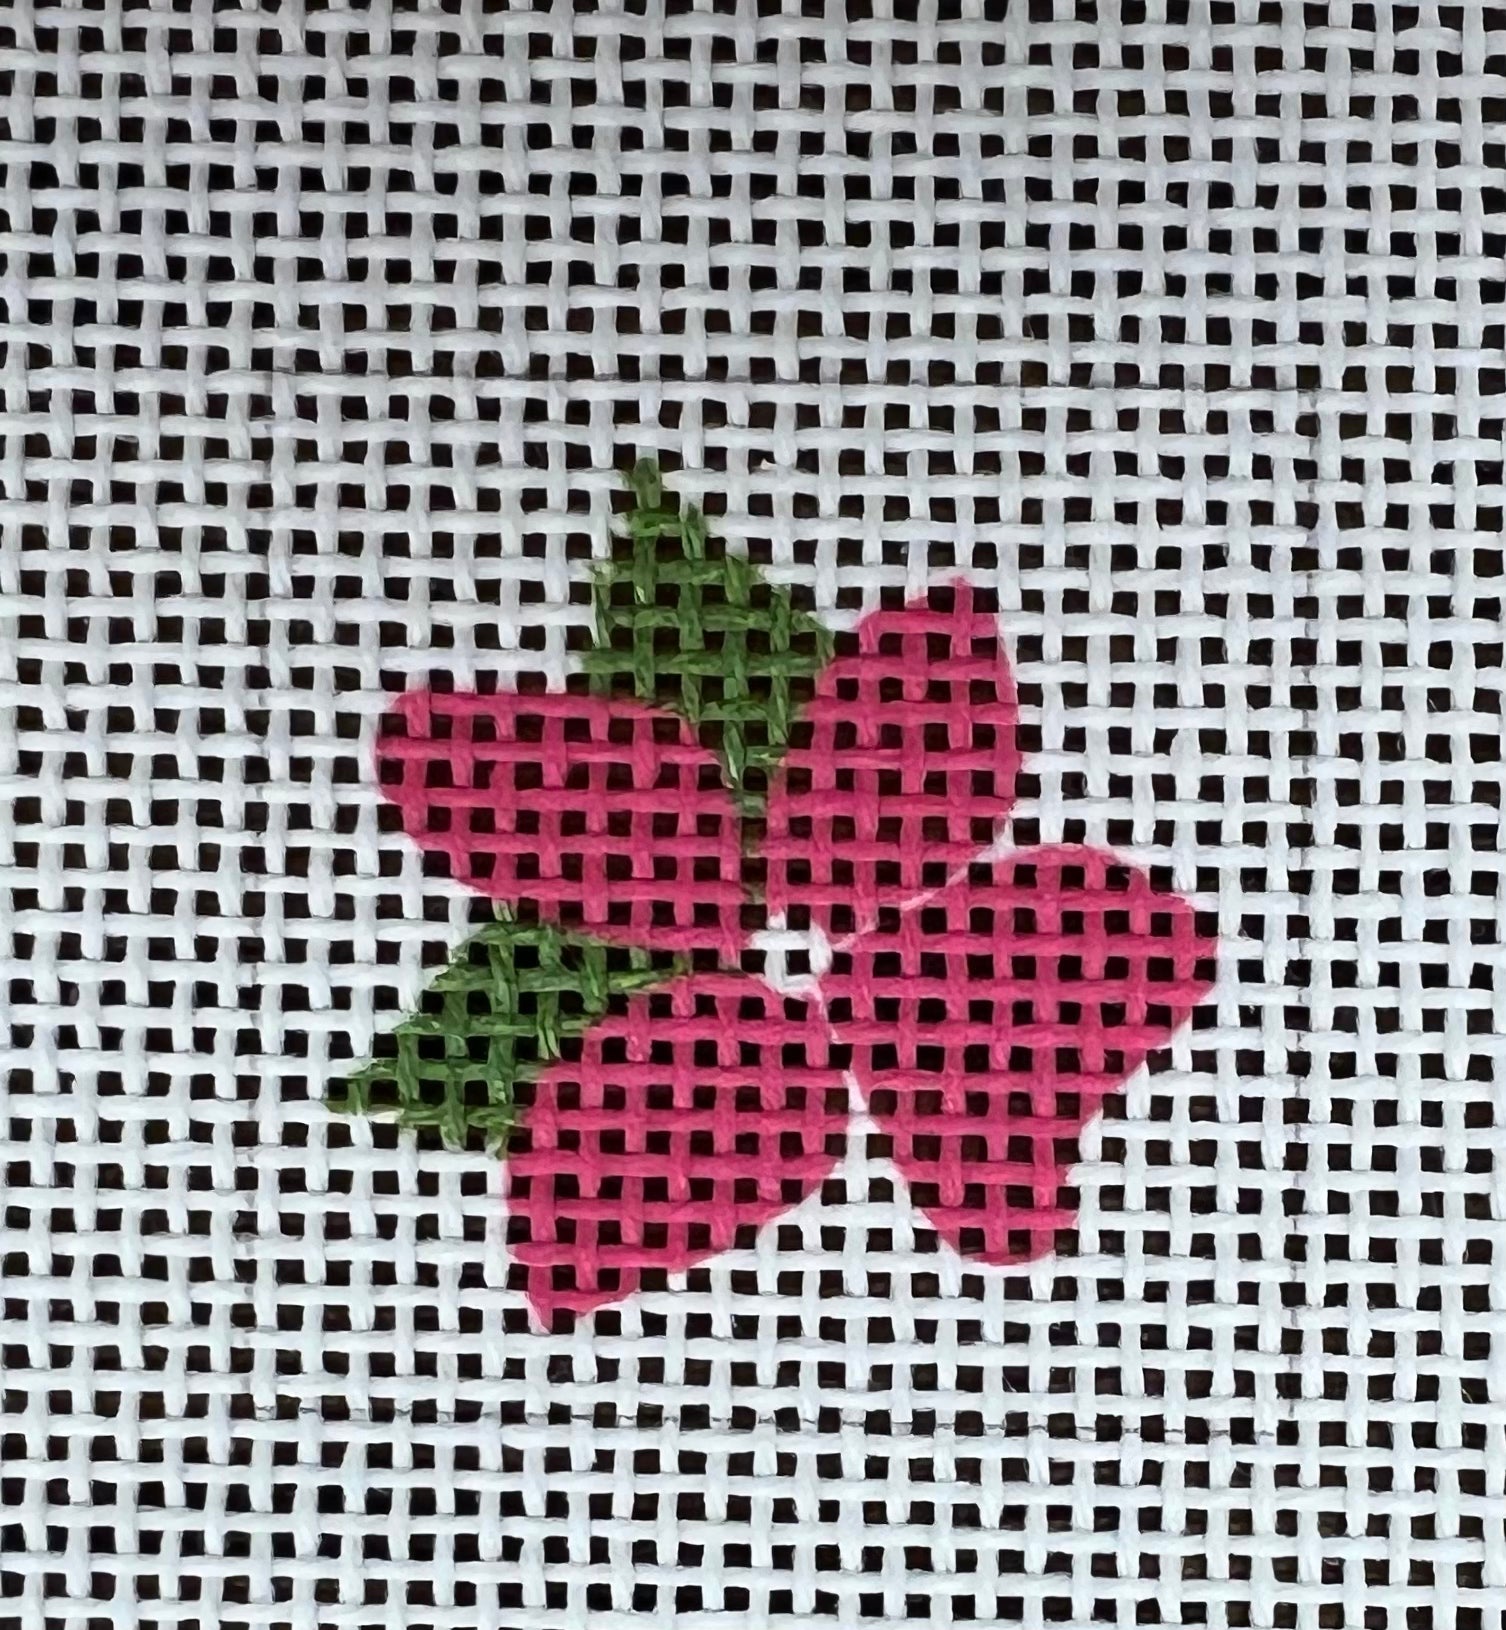 Pink Flower 1 Inch square